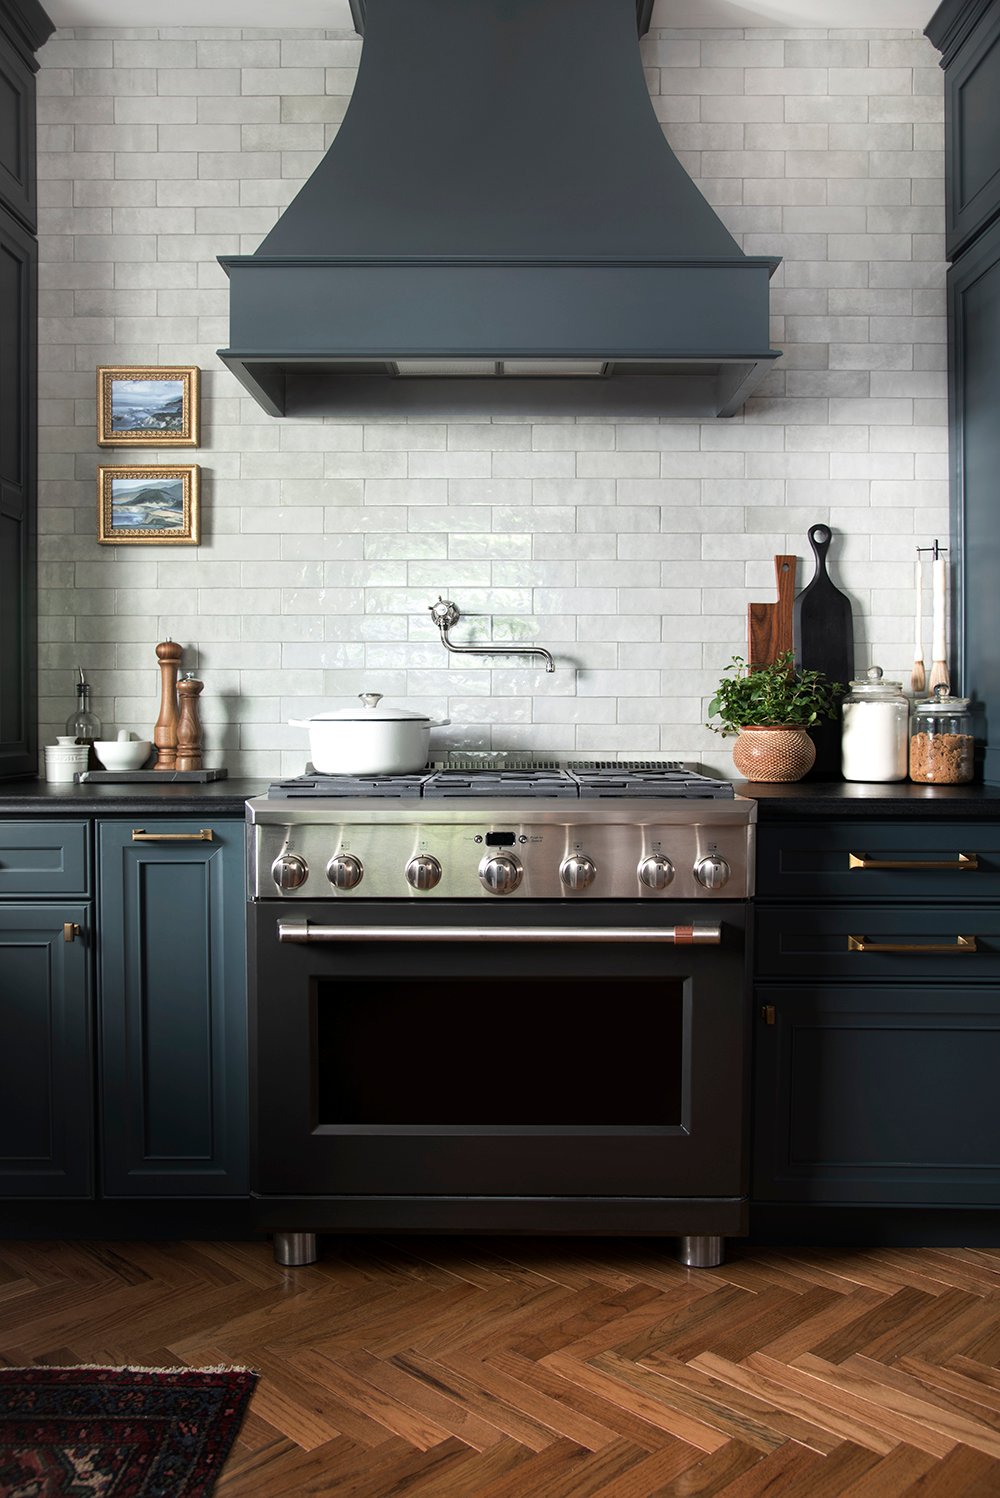 Our Dark & Moody Kitchen Reveal - roomfortuesday.com